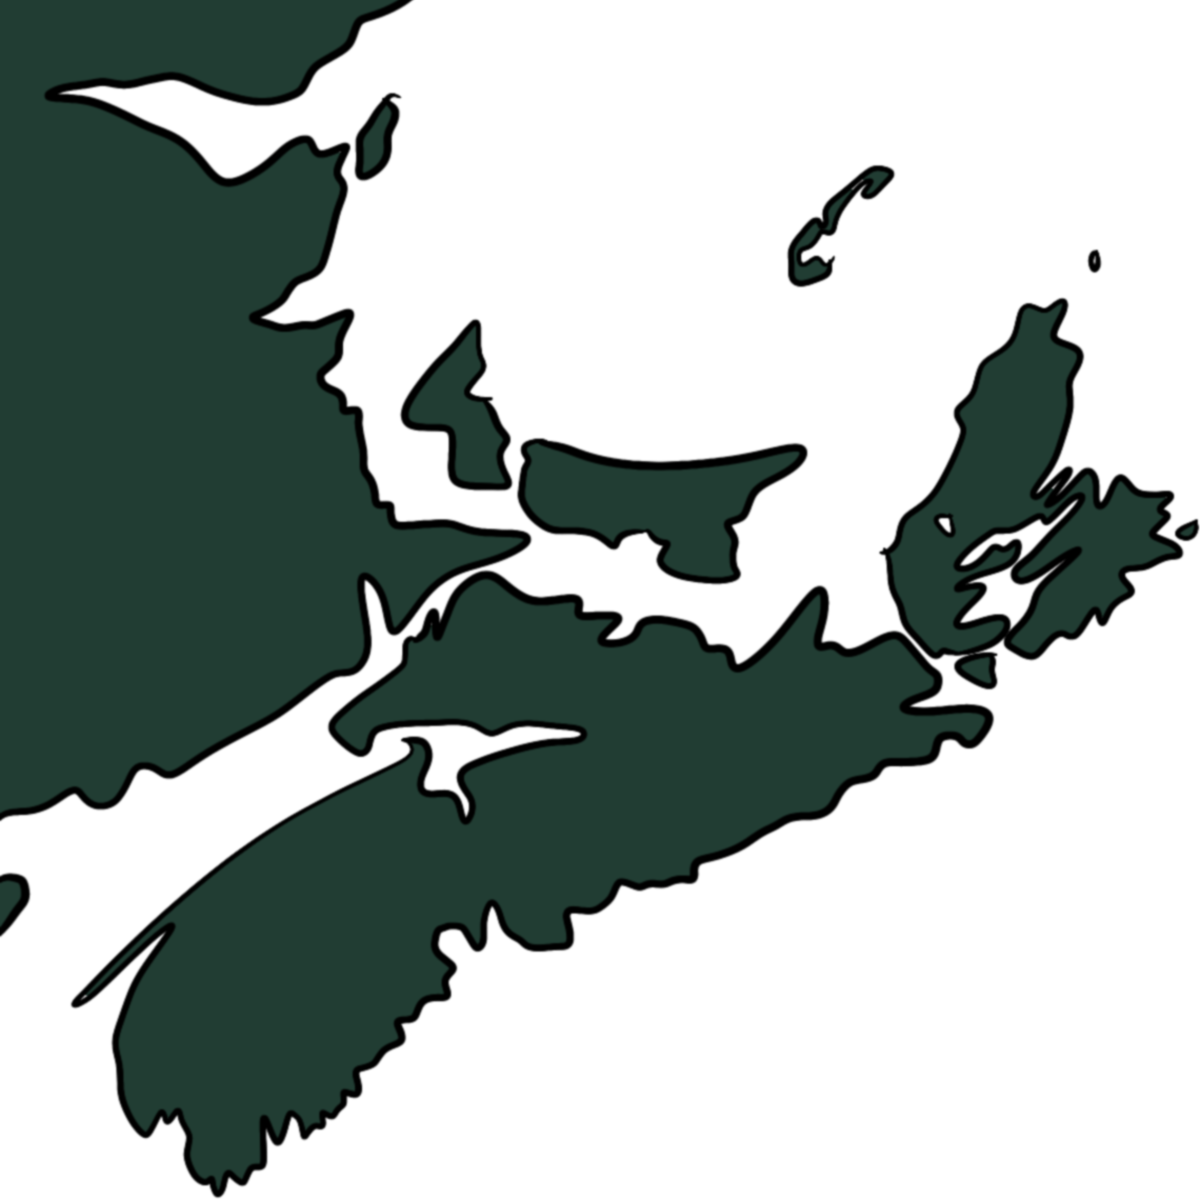 A dark green filled outline of the general area where the Acadian ethnicity developed.